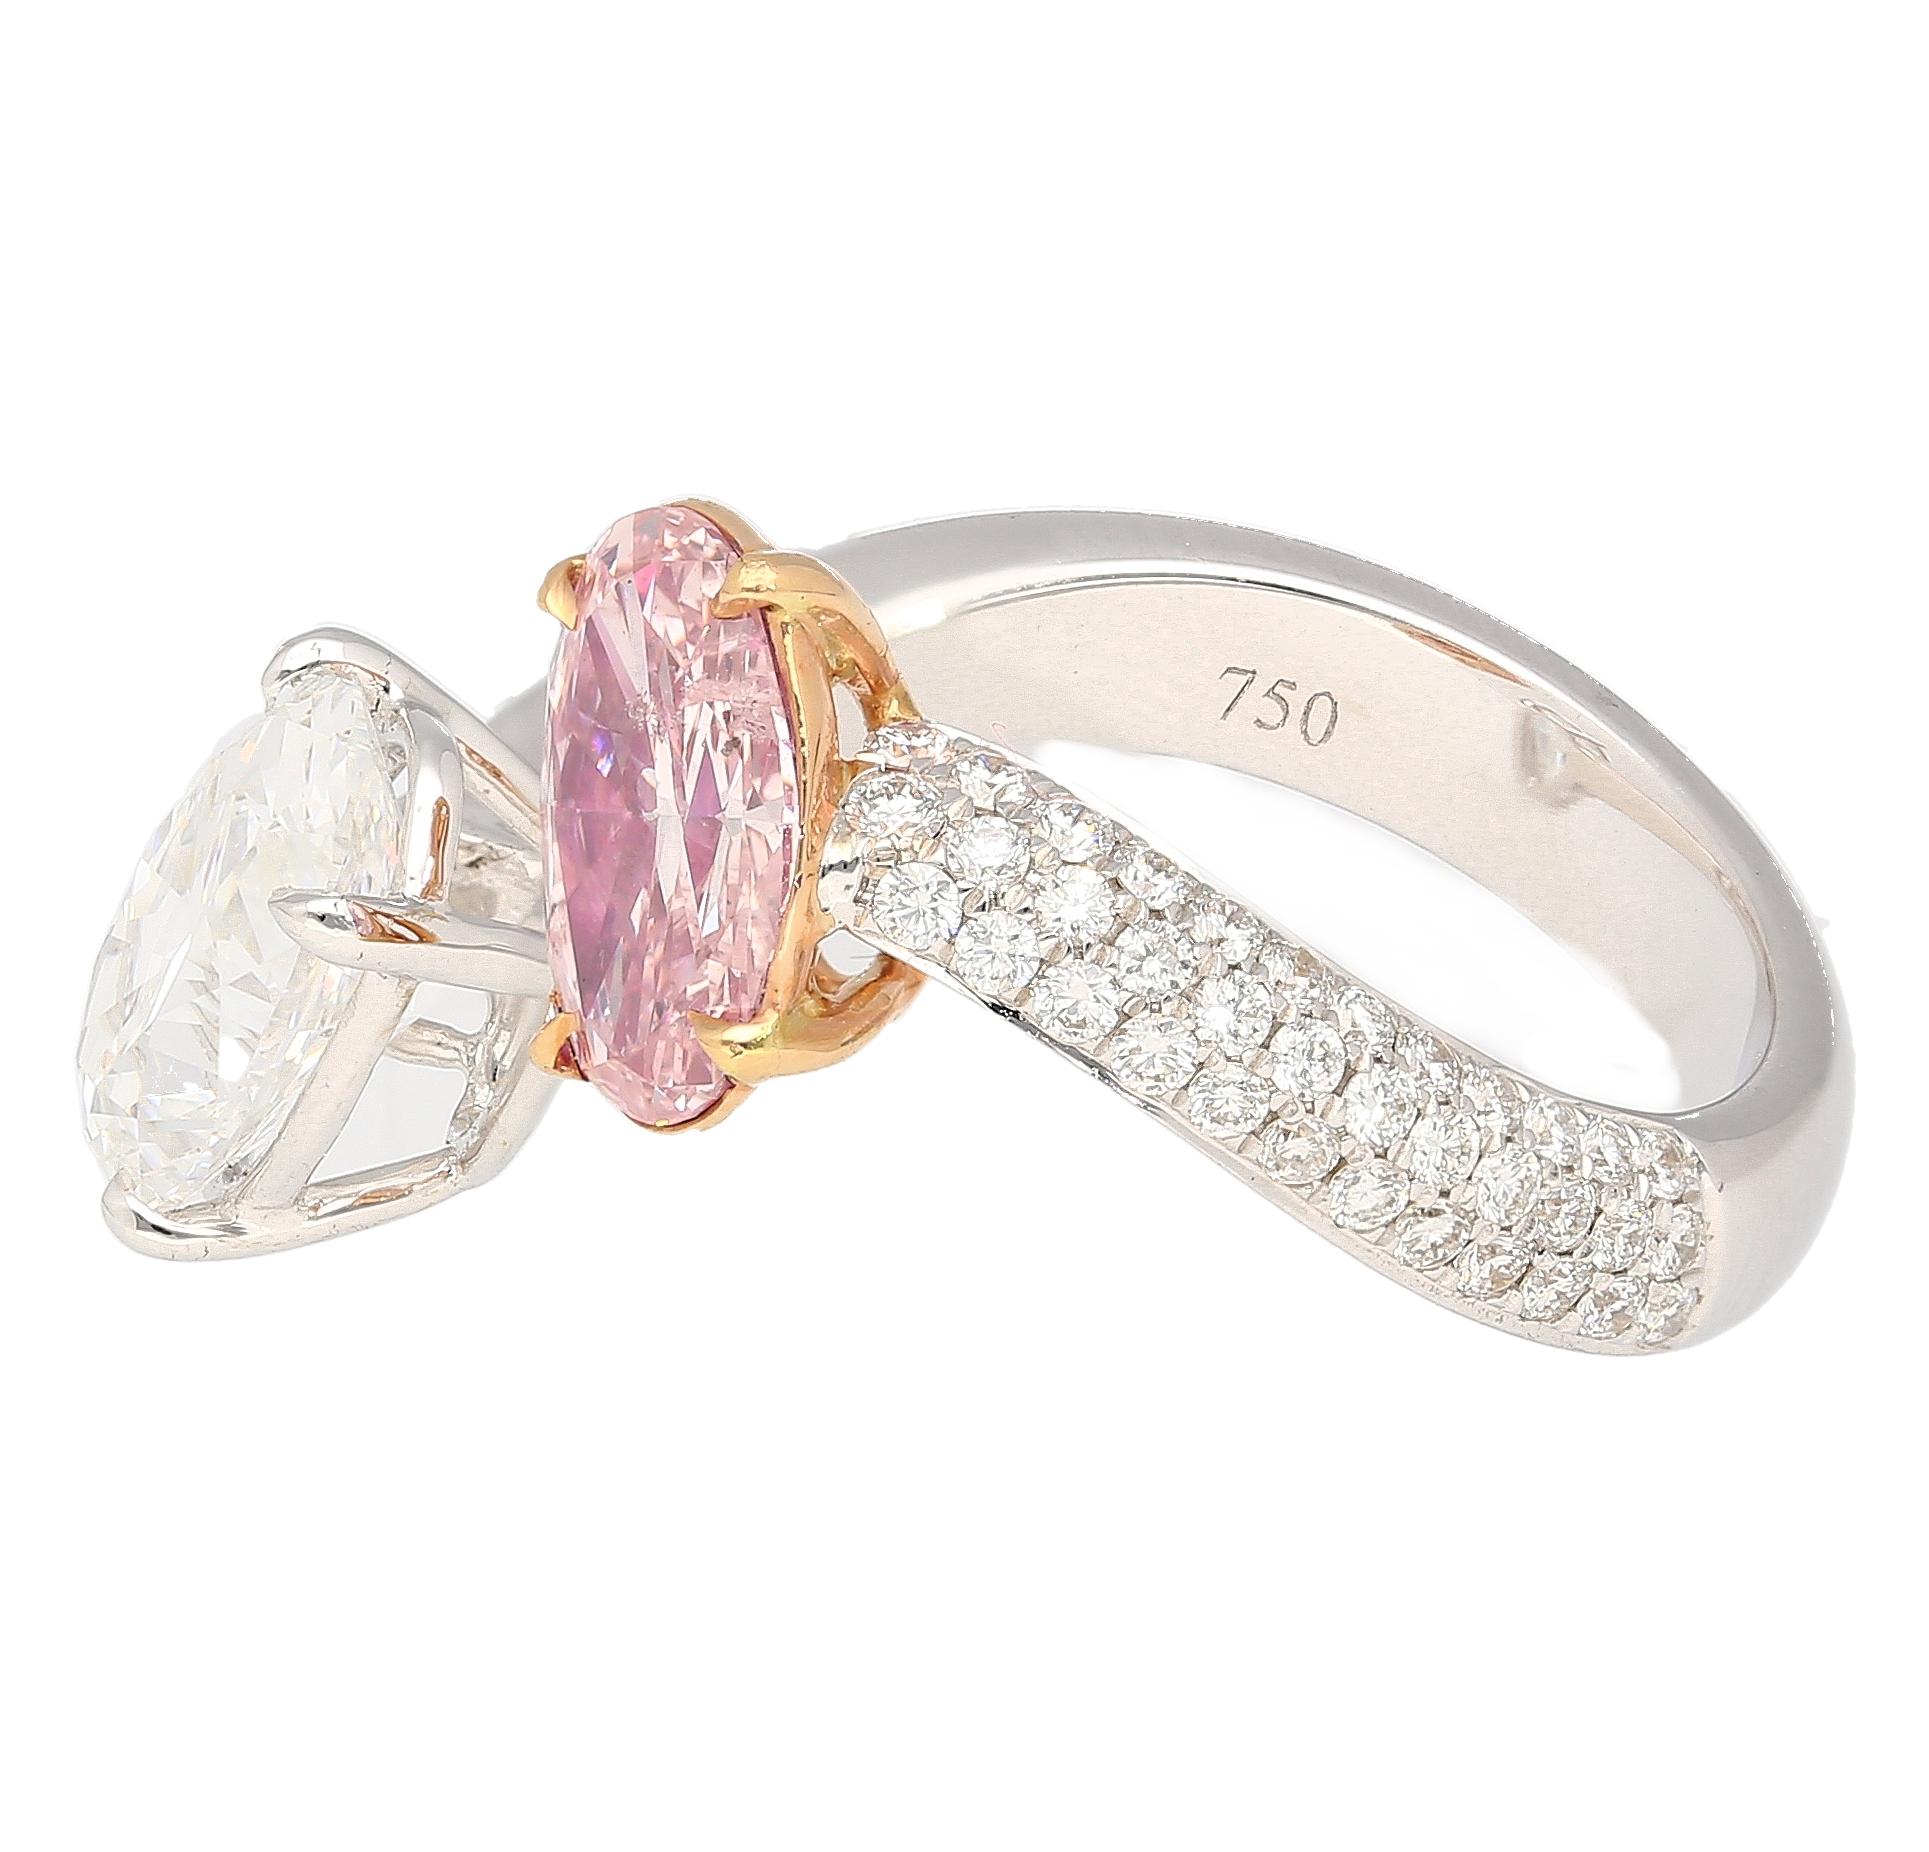 Crafted with unparalleled craftsmanship, this enchanting masterpiece unites two souls in perfect harmony. Set with a rare and captivating 1.01 carat Fancy Orangy Pink diamond, delicately mirrored by a 2.02 carat D color white diamond. This 